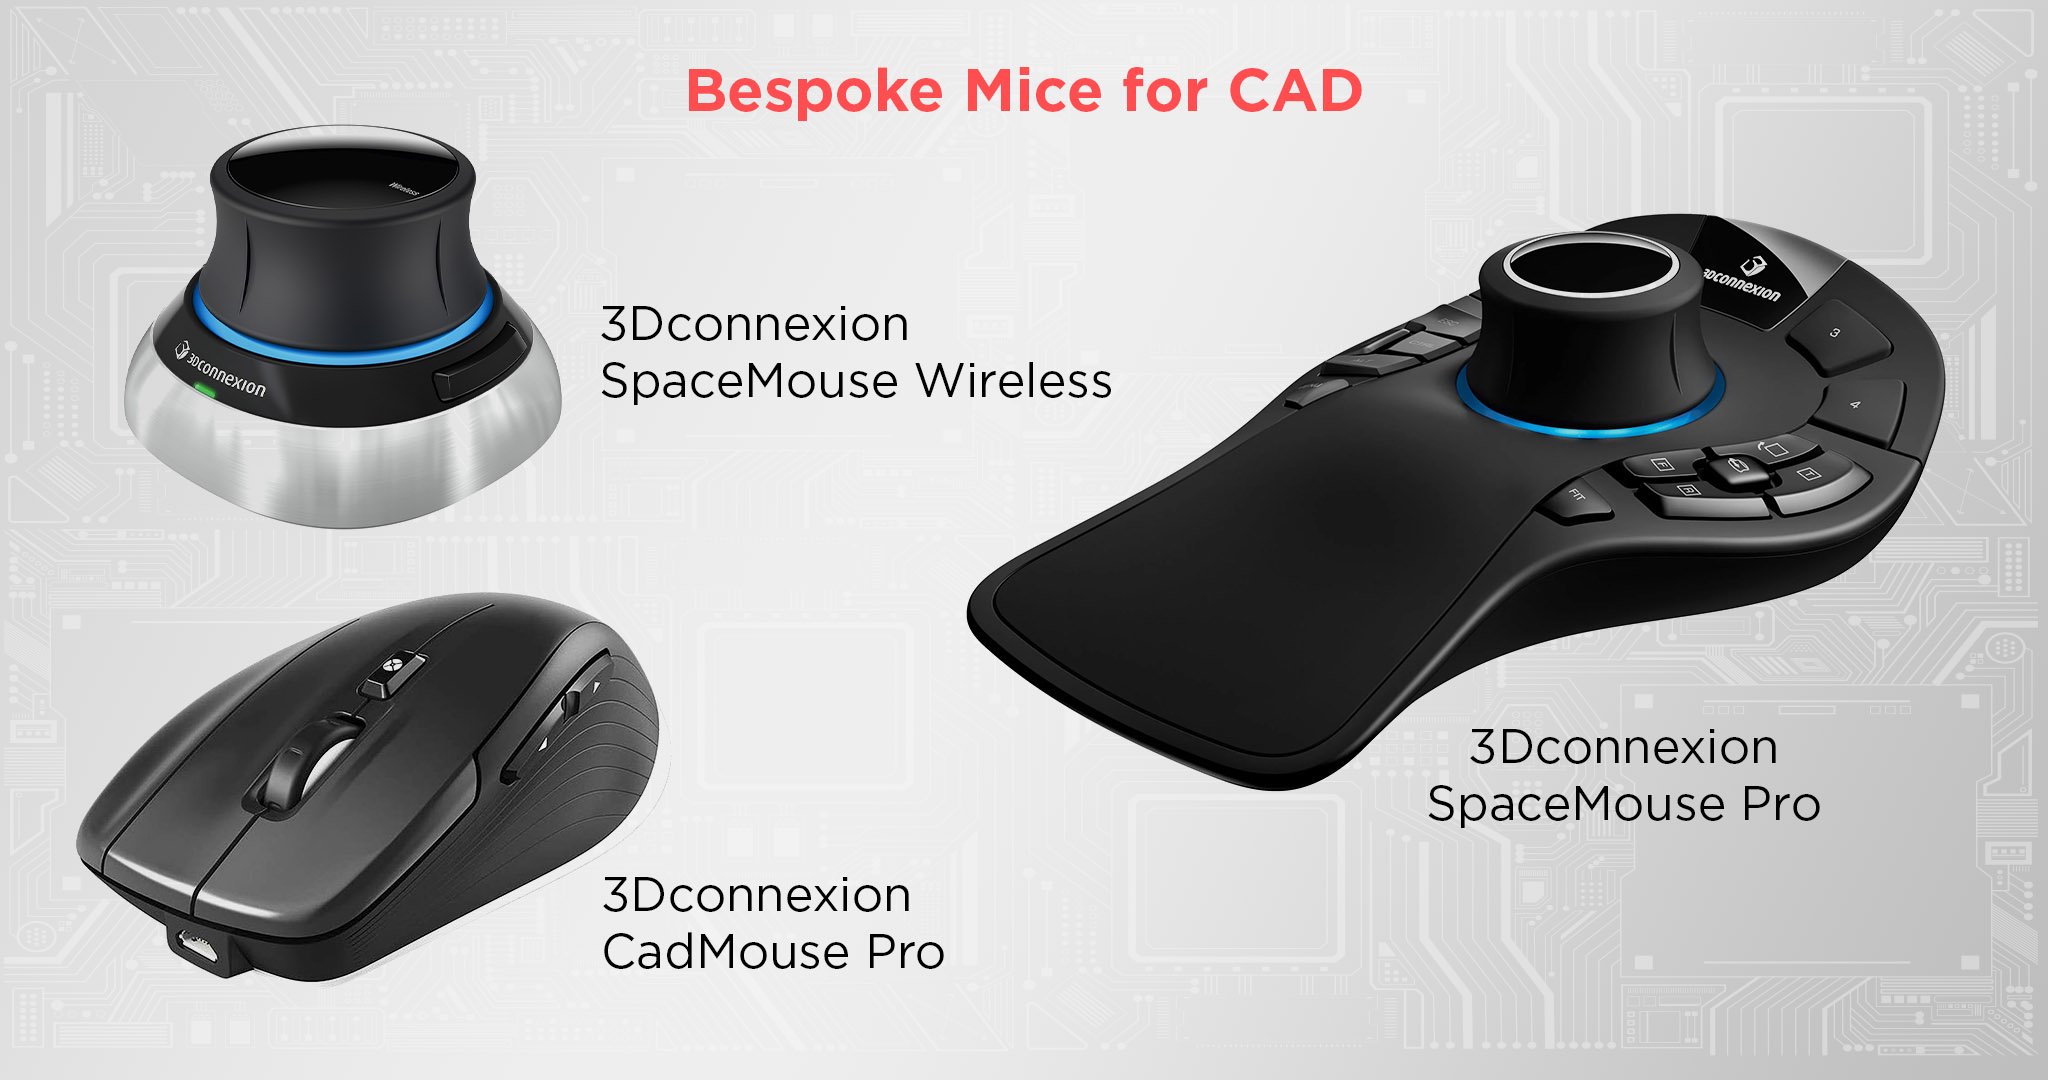 Bespoke Mice for CAD Work